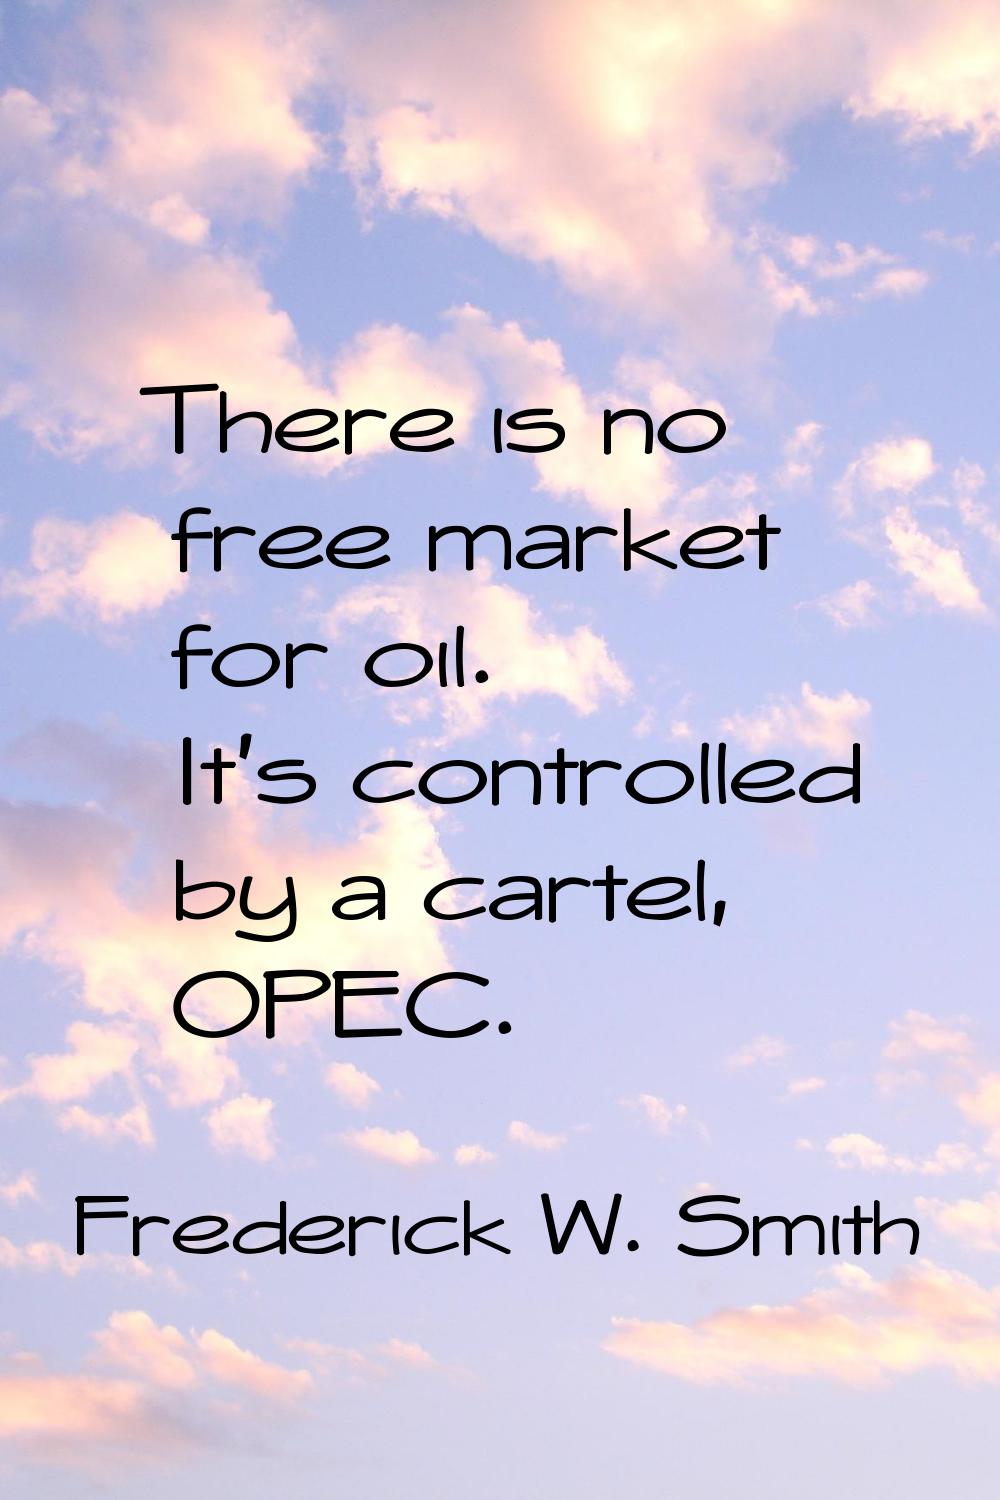 There is no free market for oil. It's controlled by a cartel, OPEC.